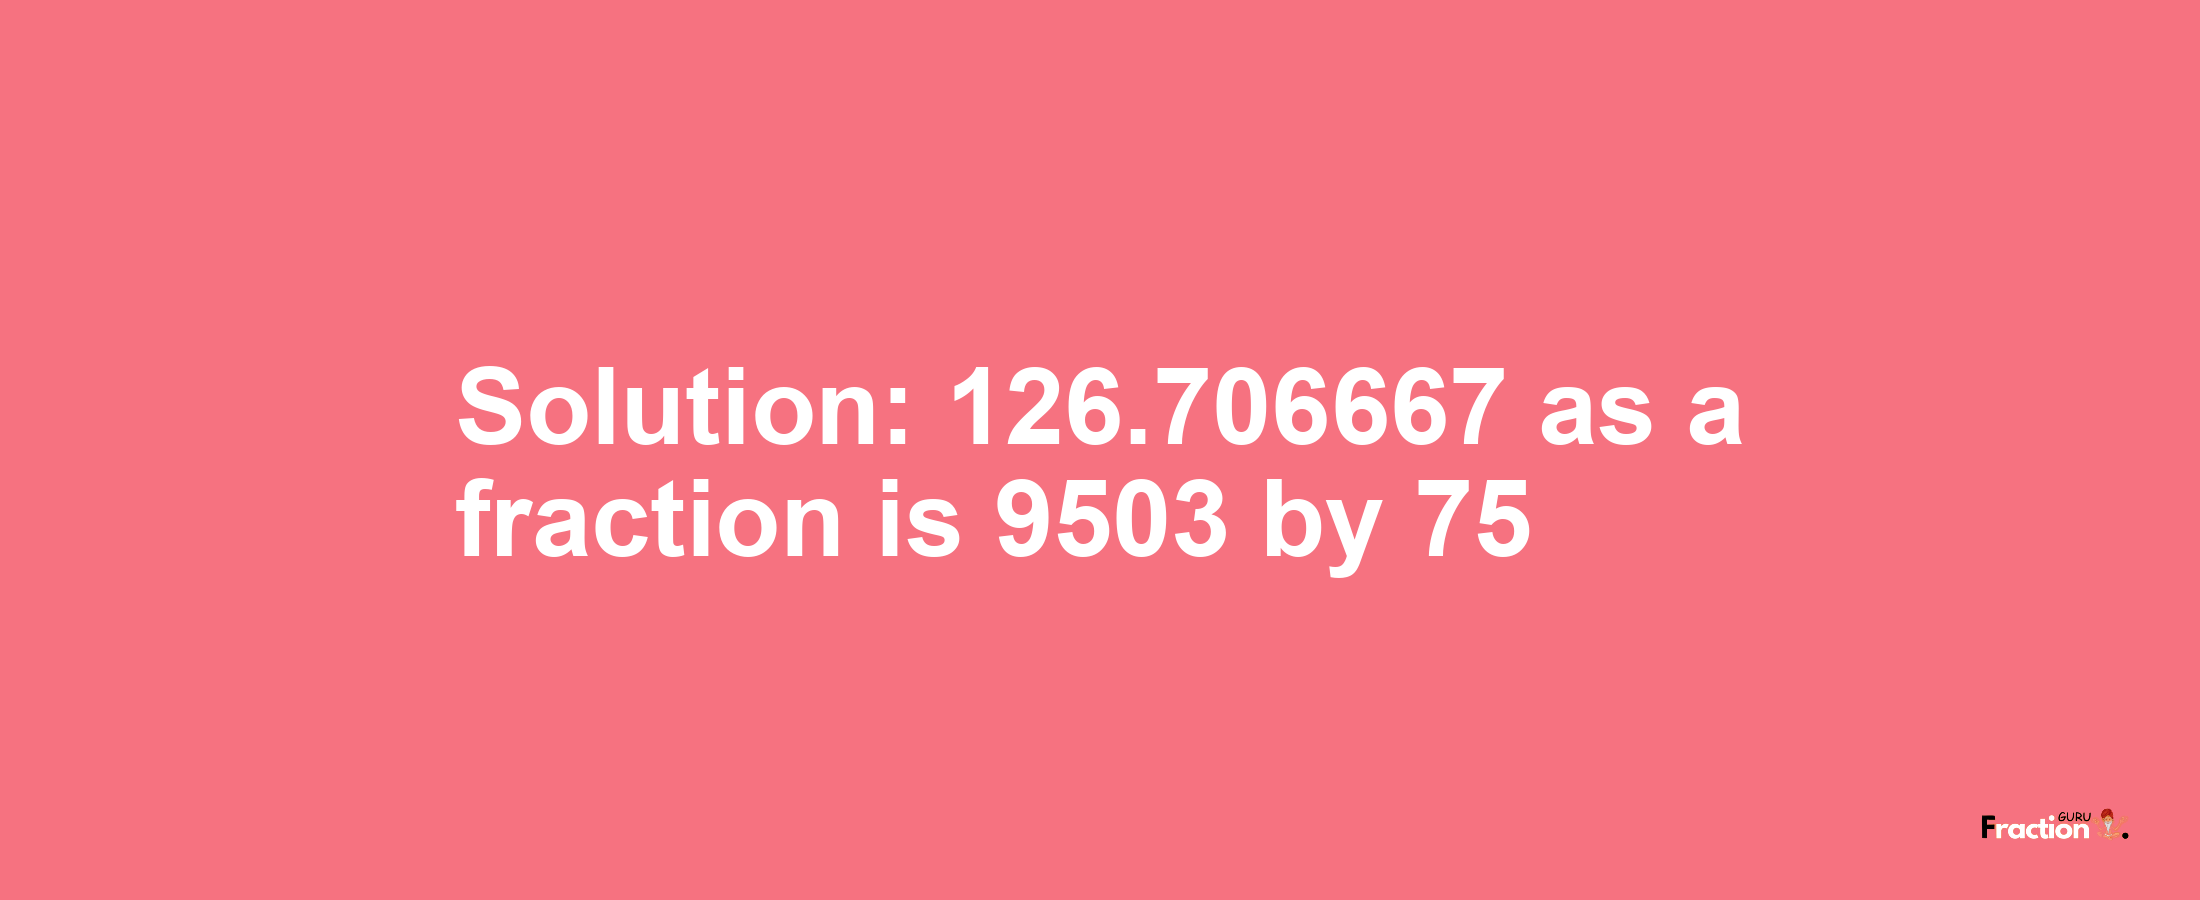 Solution:126.706667 as a fraction is 9503/75